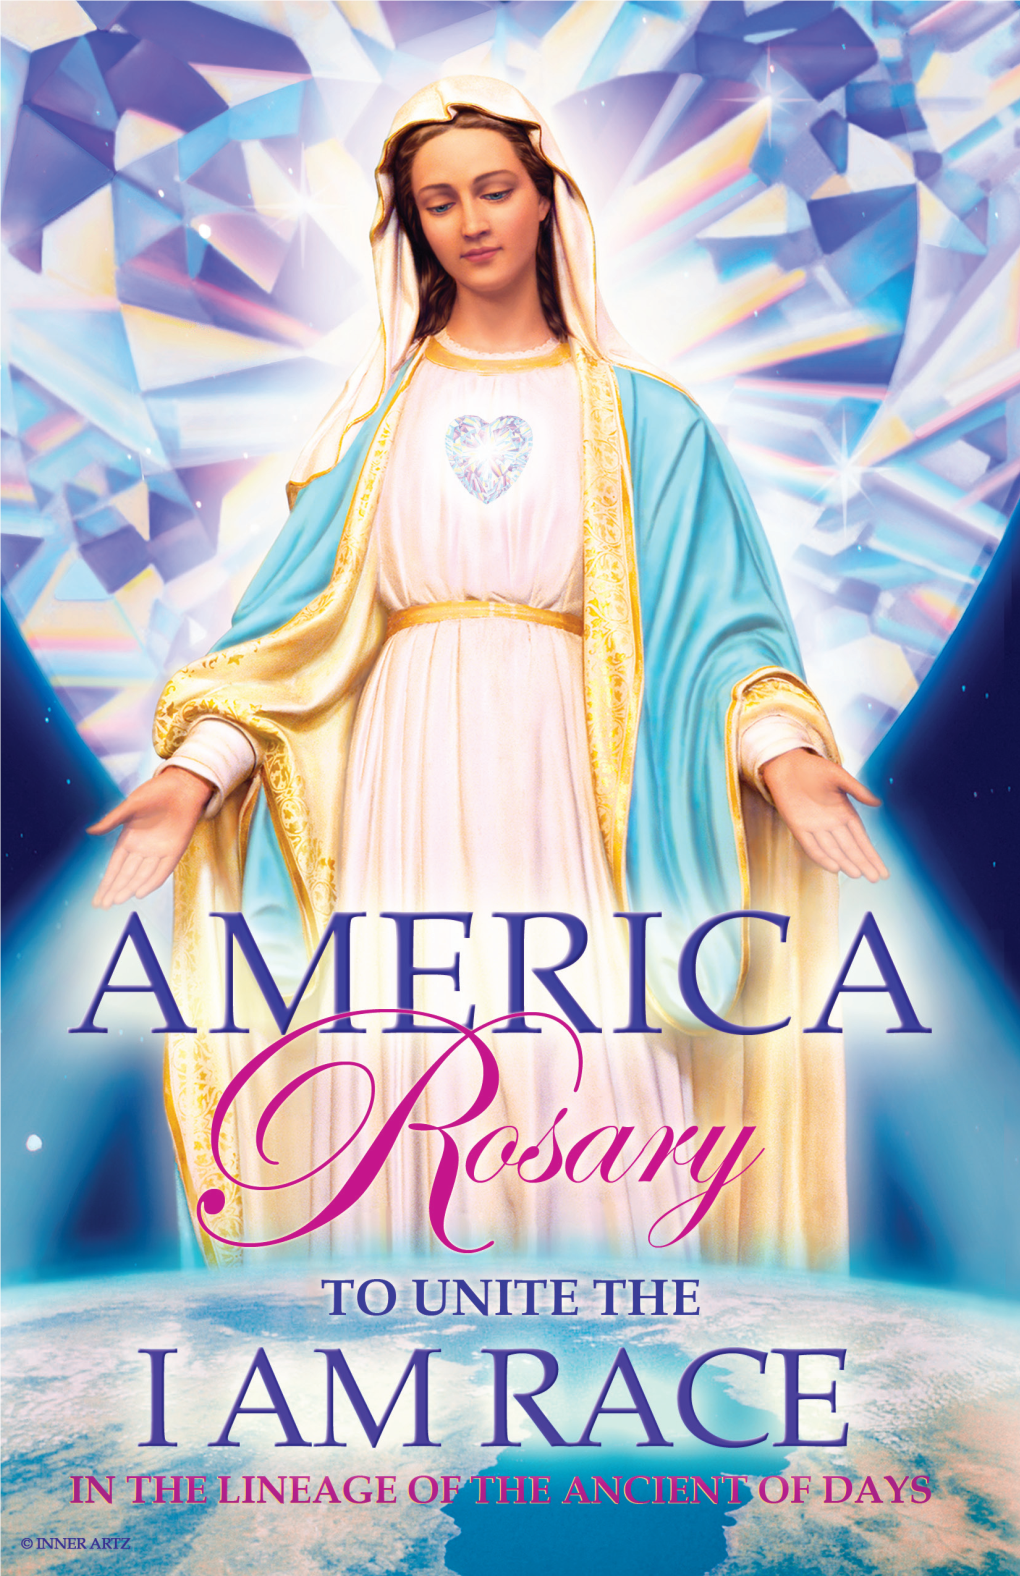 America Rosary to Unite the I AM Race